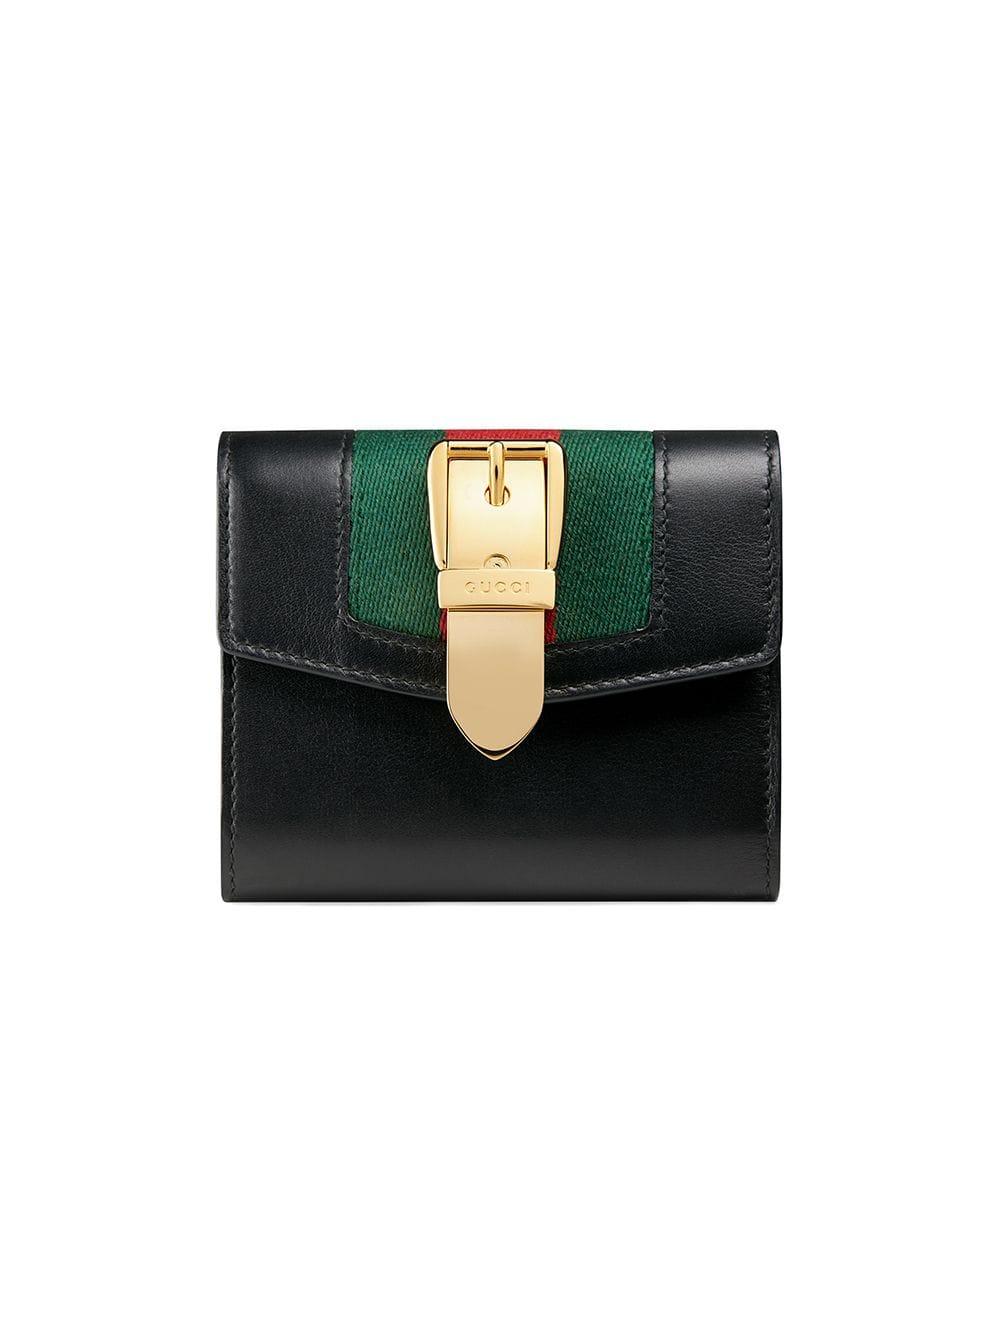 Gucci Sylvie Leather Wallet in Black | Lyst